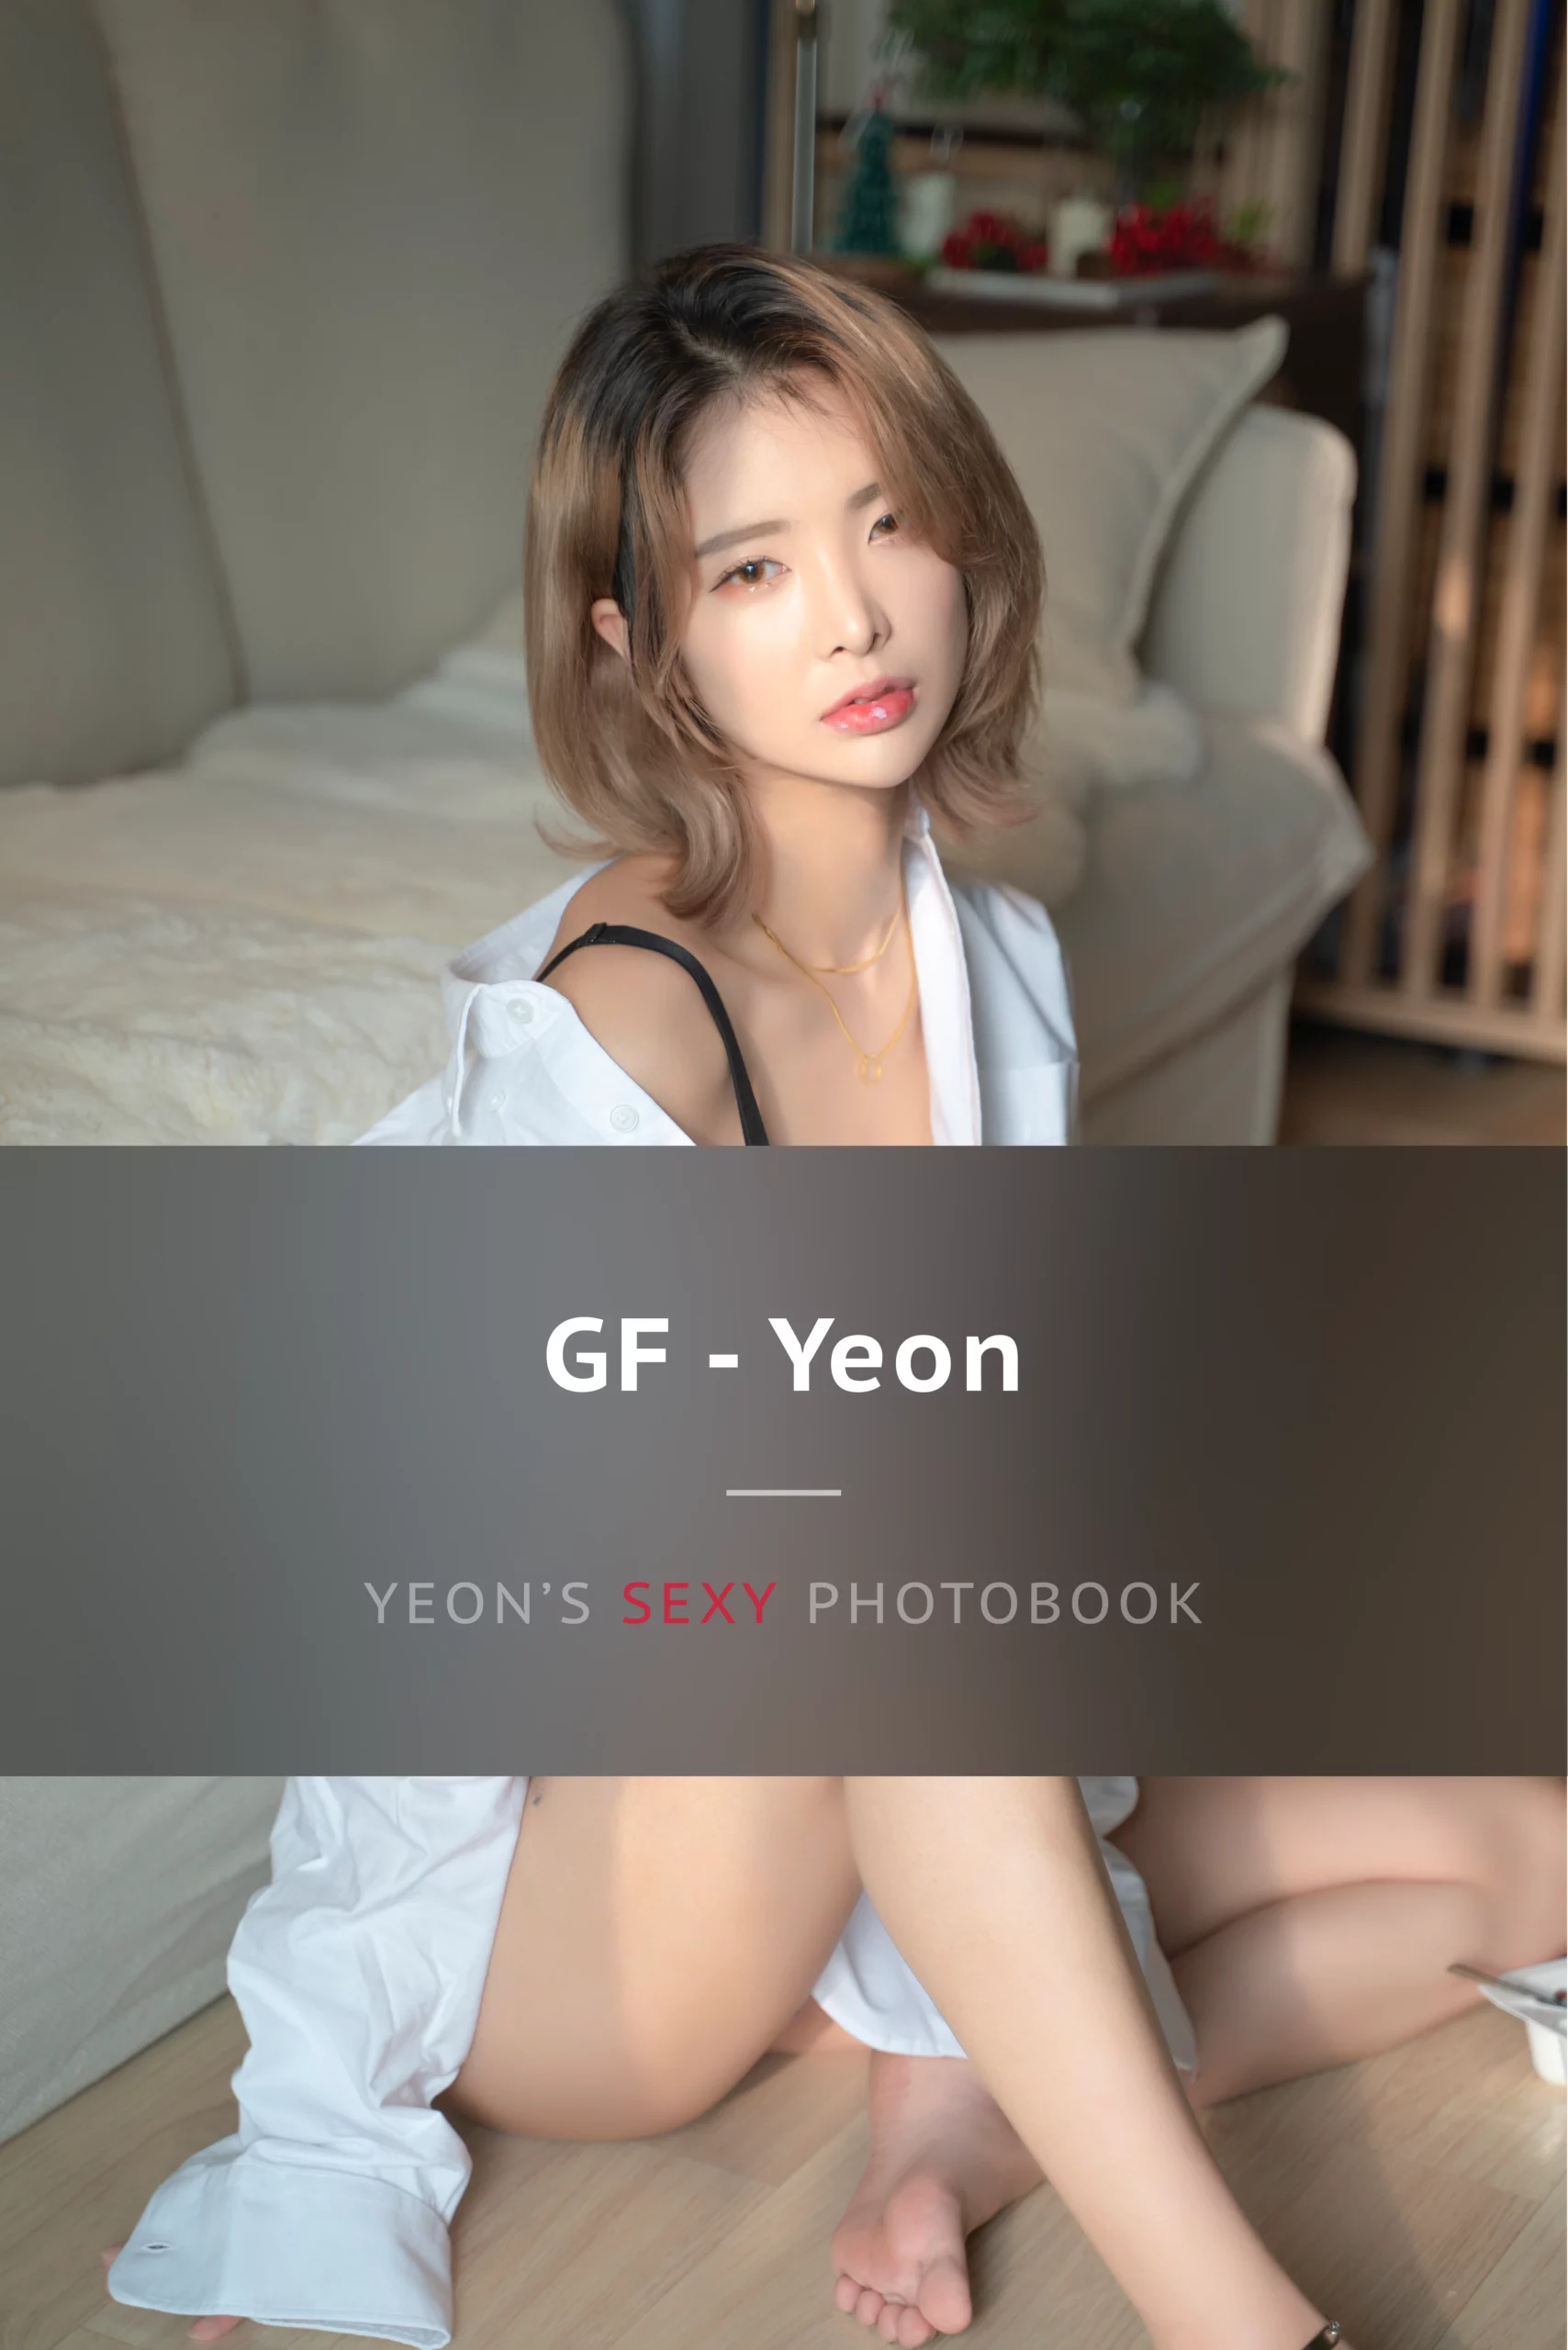 This is the sample picture from [FANDING] Yeon｜효연 - GF post. Click here to see image full size.